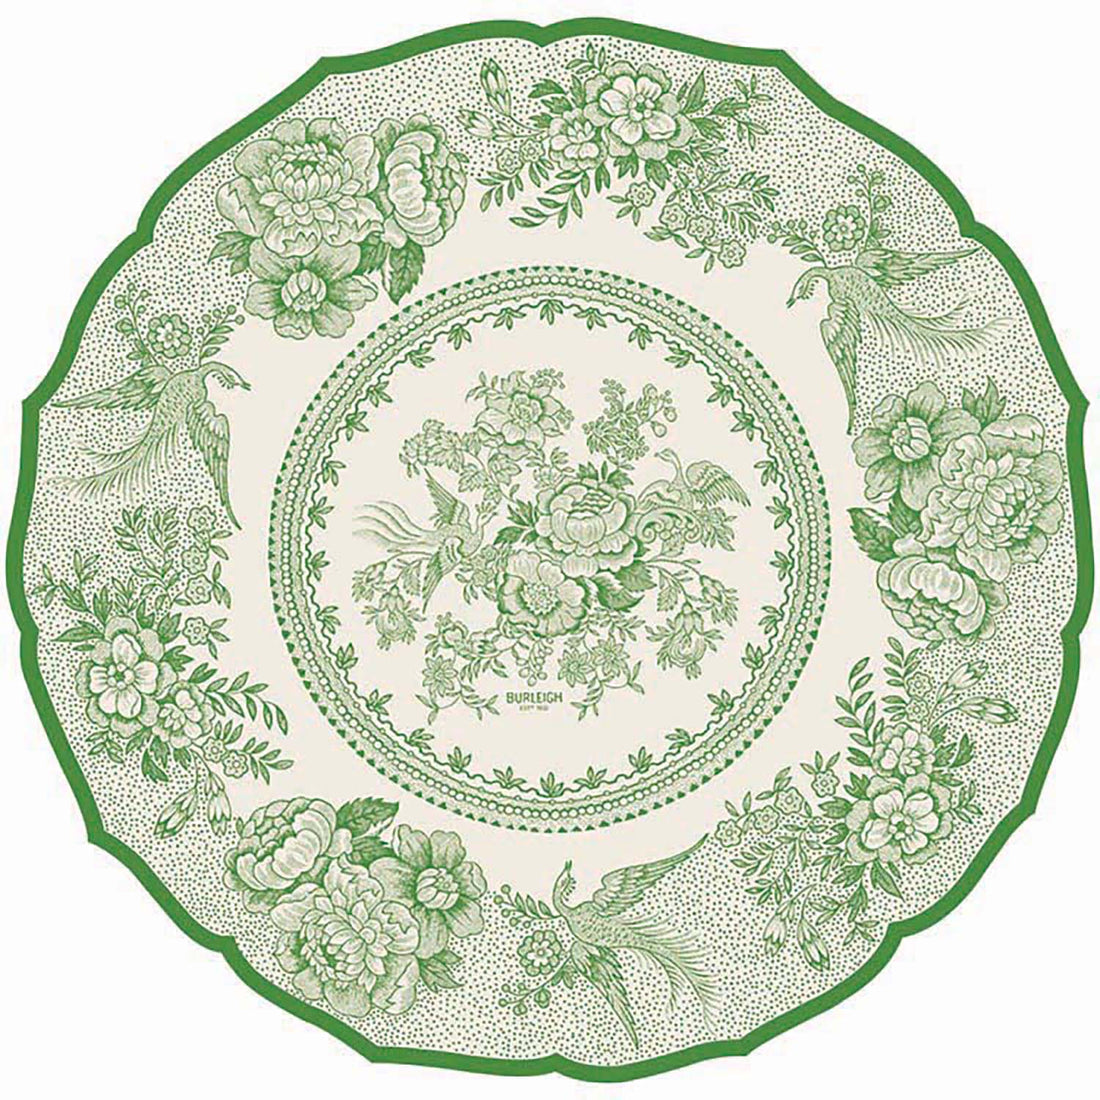 A round design with a scalloped edge, resembling a vintage plate with green linework of flowers and birds on a white background.